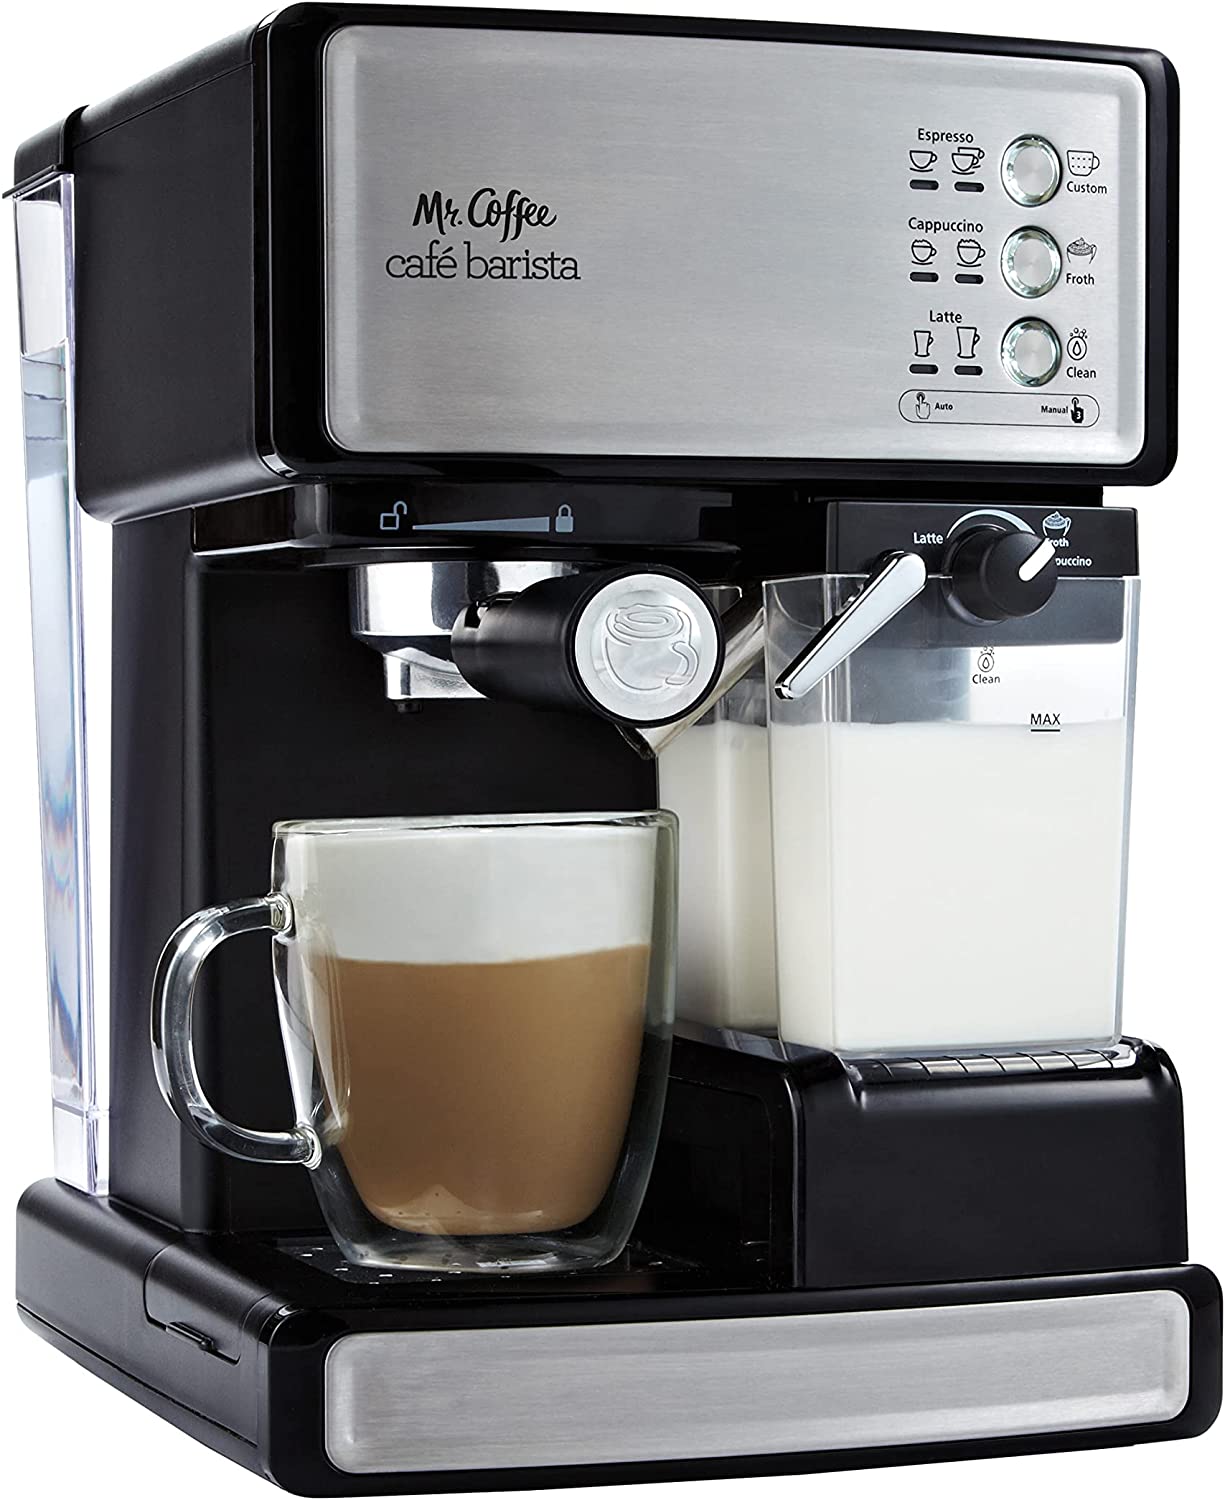 
Mr. Coffee Espresso and Cappuccino Machine, Programmable Coffee Maker with Automatic Milk Frother and 15-Bar Pump, Stainless Steel, Best Espresso Machines Under $200,